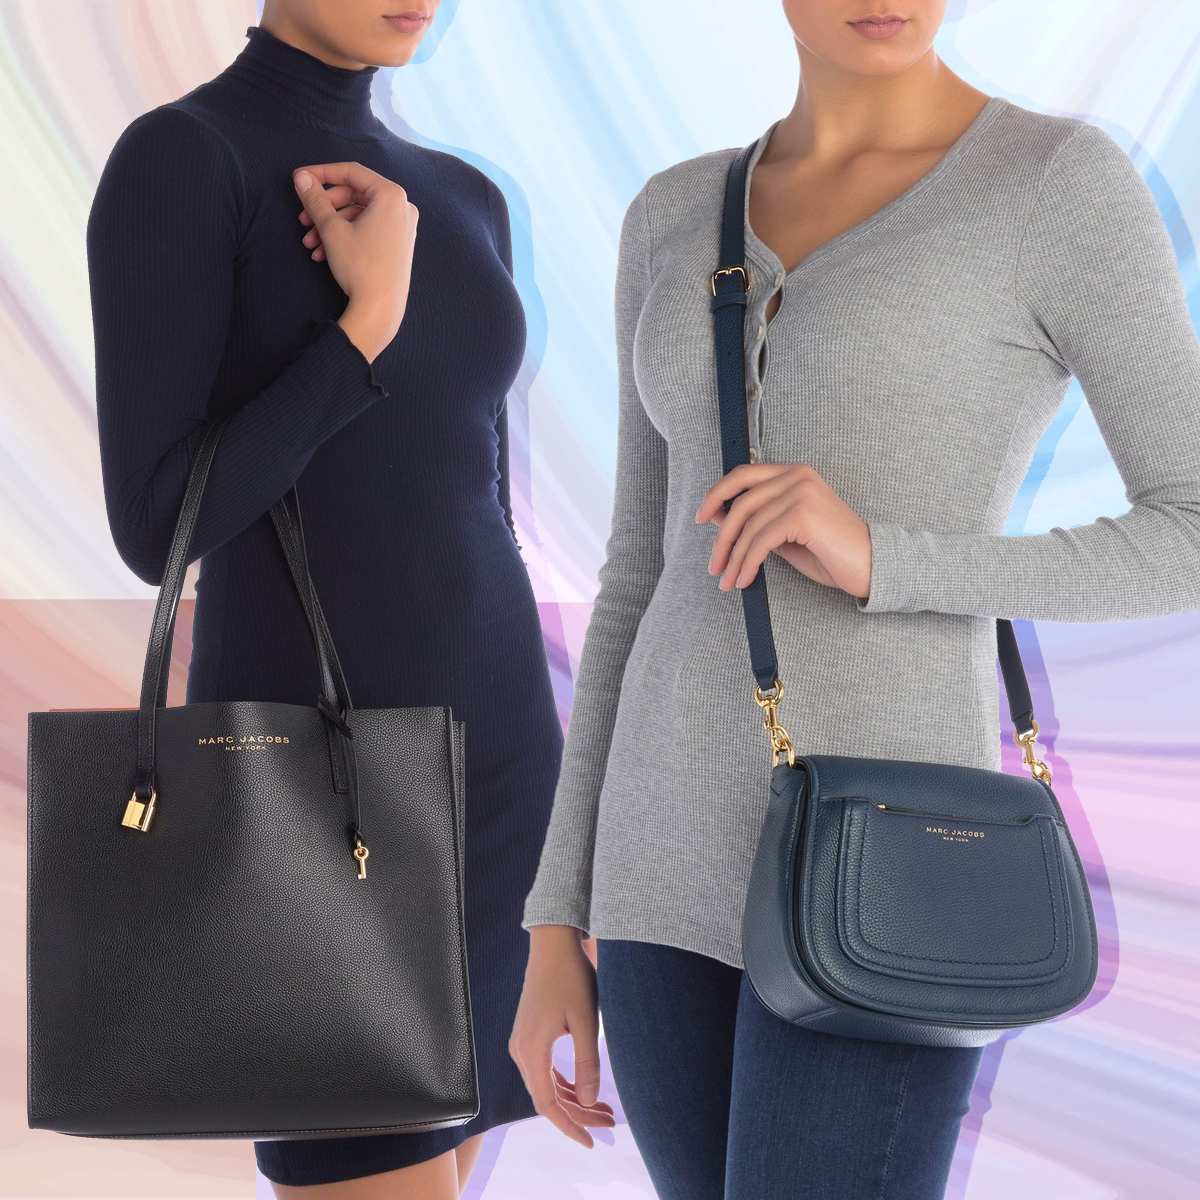 Rejoice Nationwide Purse Day With Nordstrom Rack&#39;s Flash Sale - E! On-line - NORMA JOURNAL